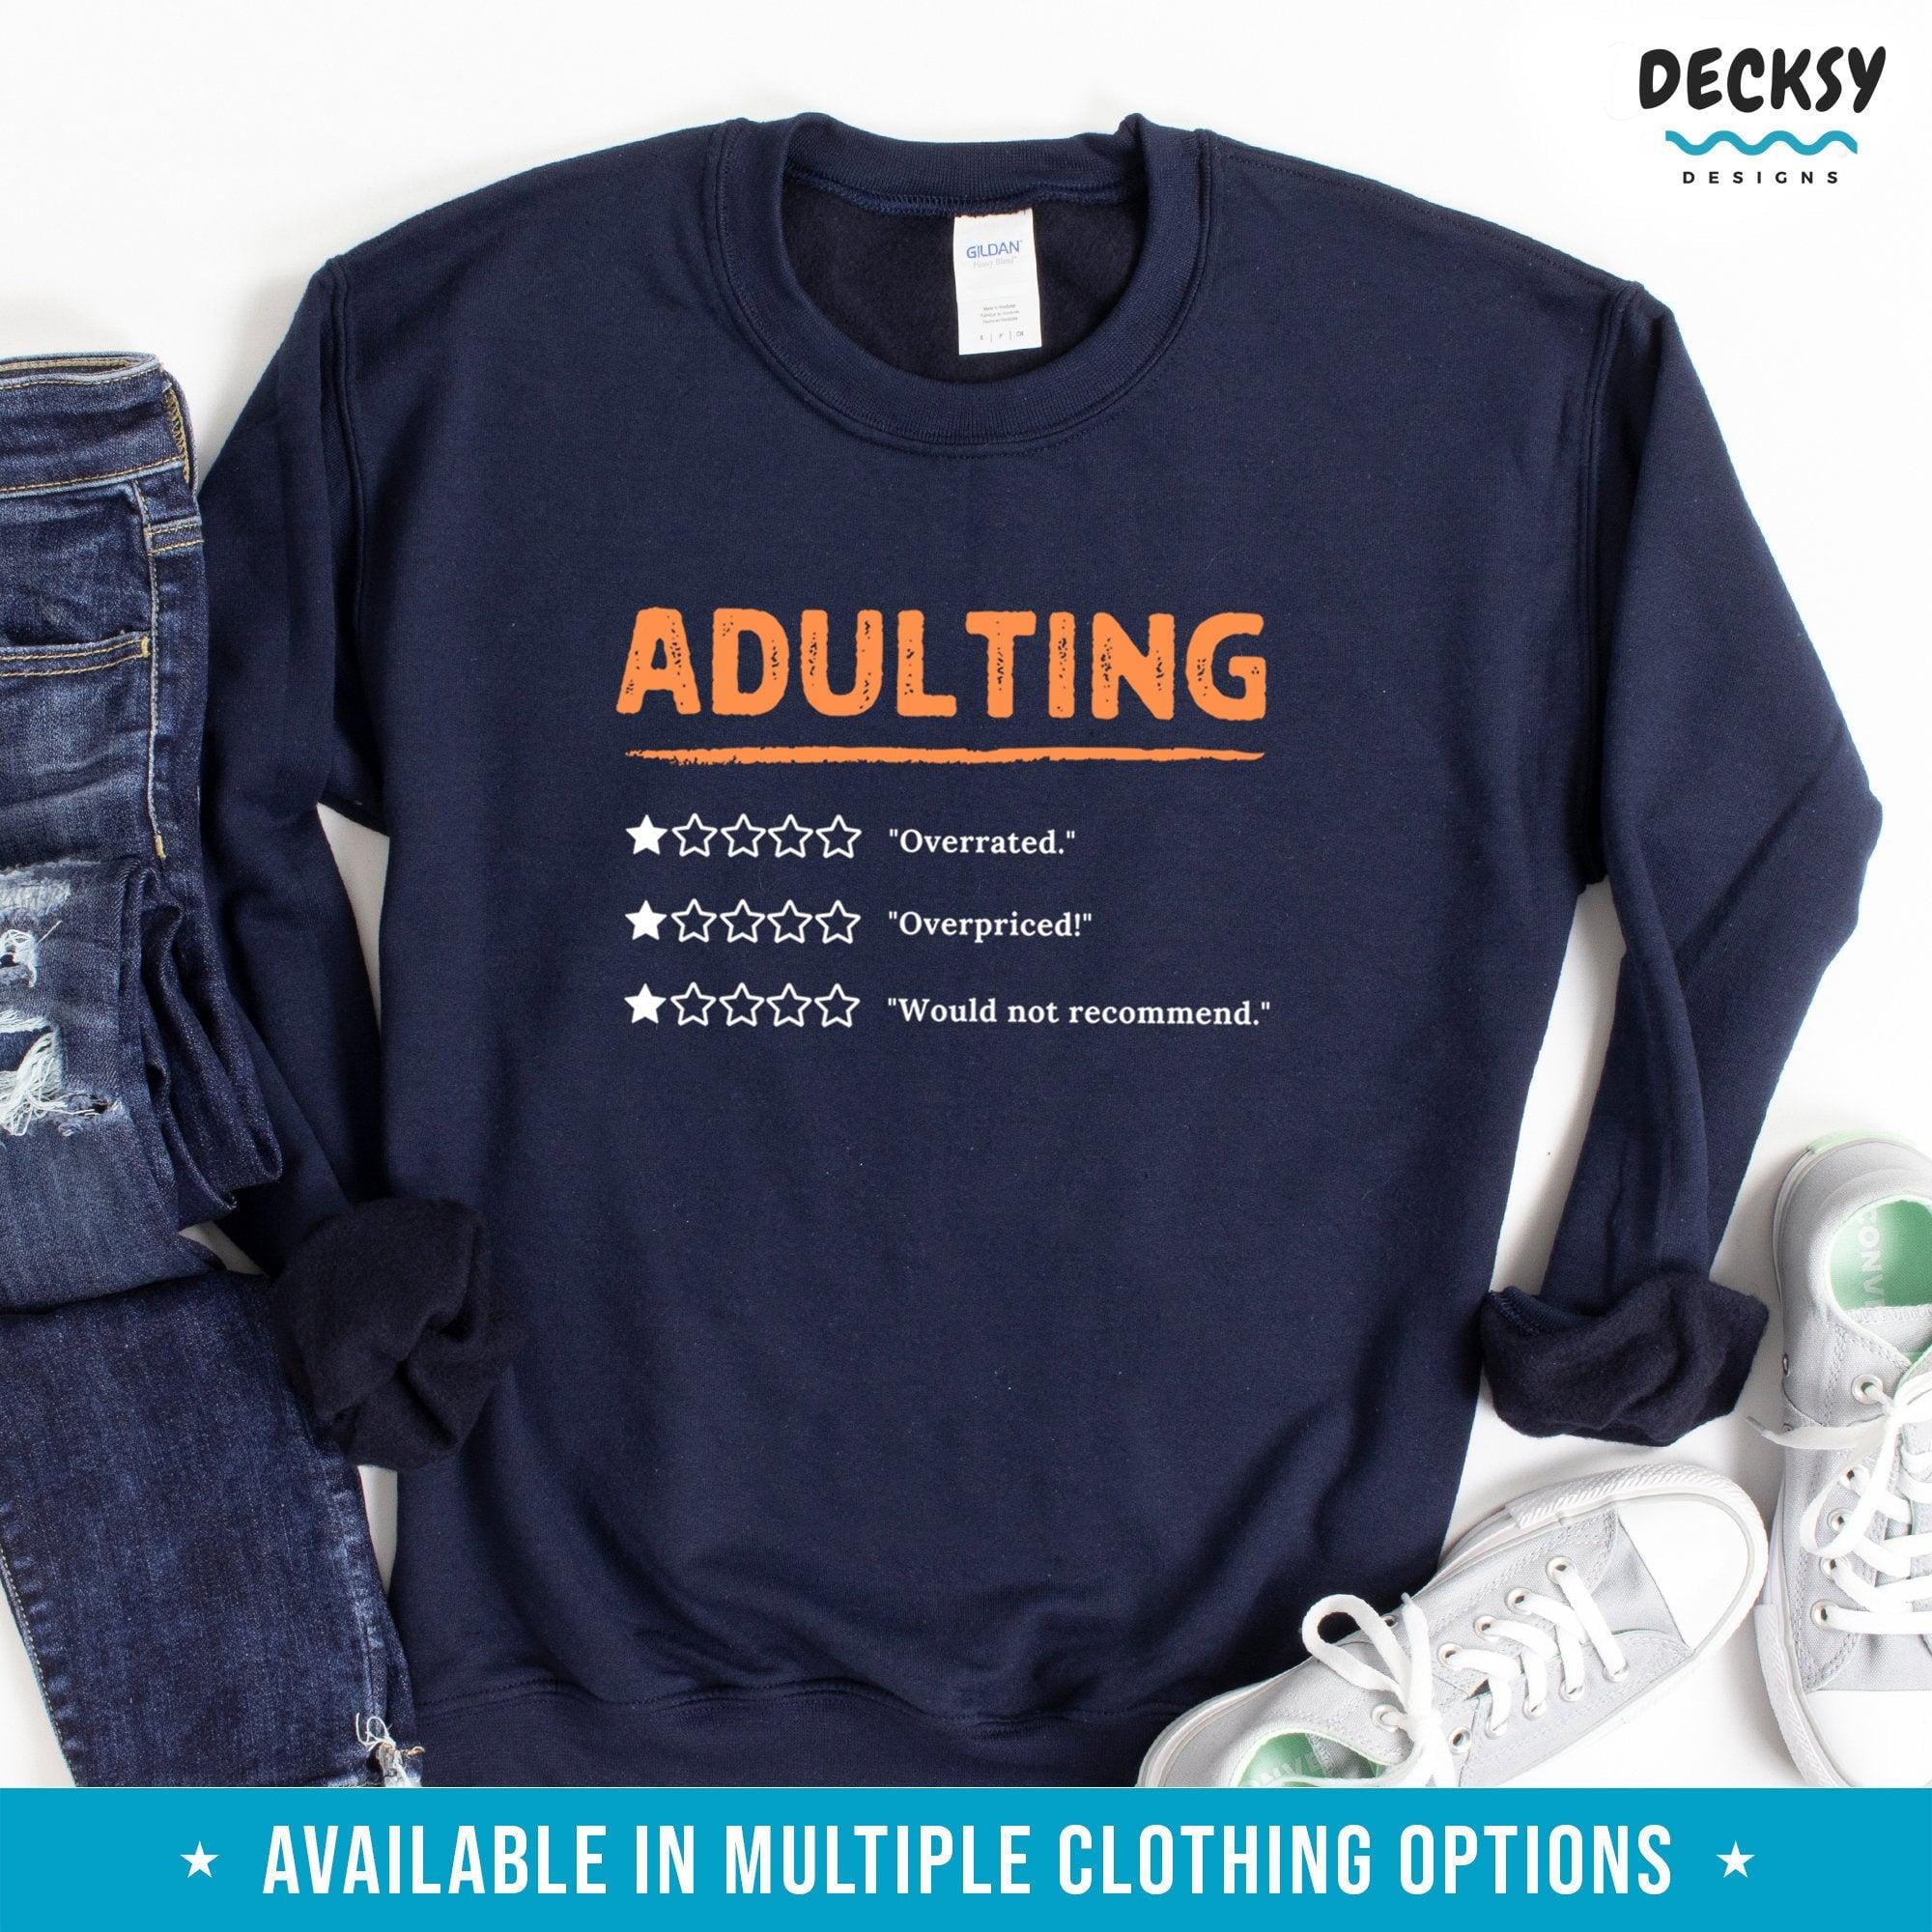 Adulting Shirt, 18th Birthday Gift, Graduation Crewneck Sweater-Clothing:Gender-Neutral Adult Clothing:Tops & Tees:T-shirts:Graphic Tees-DecksyDesigns